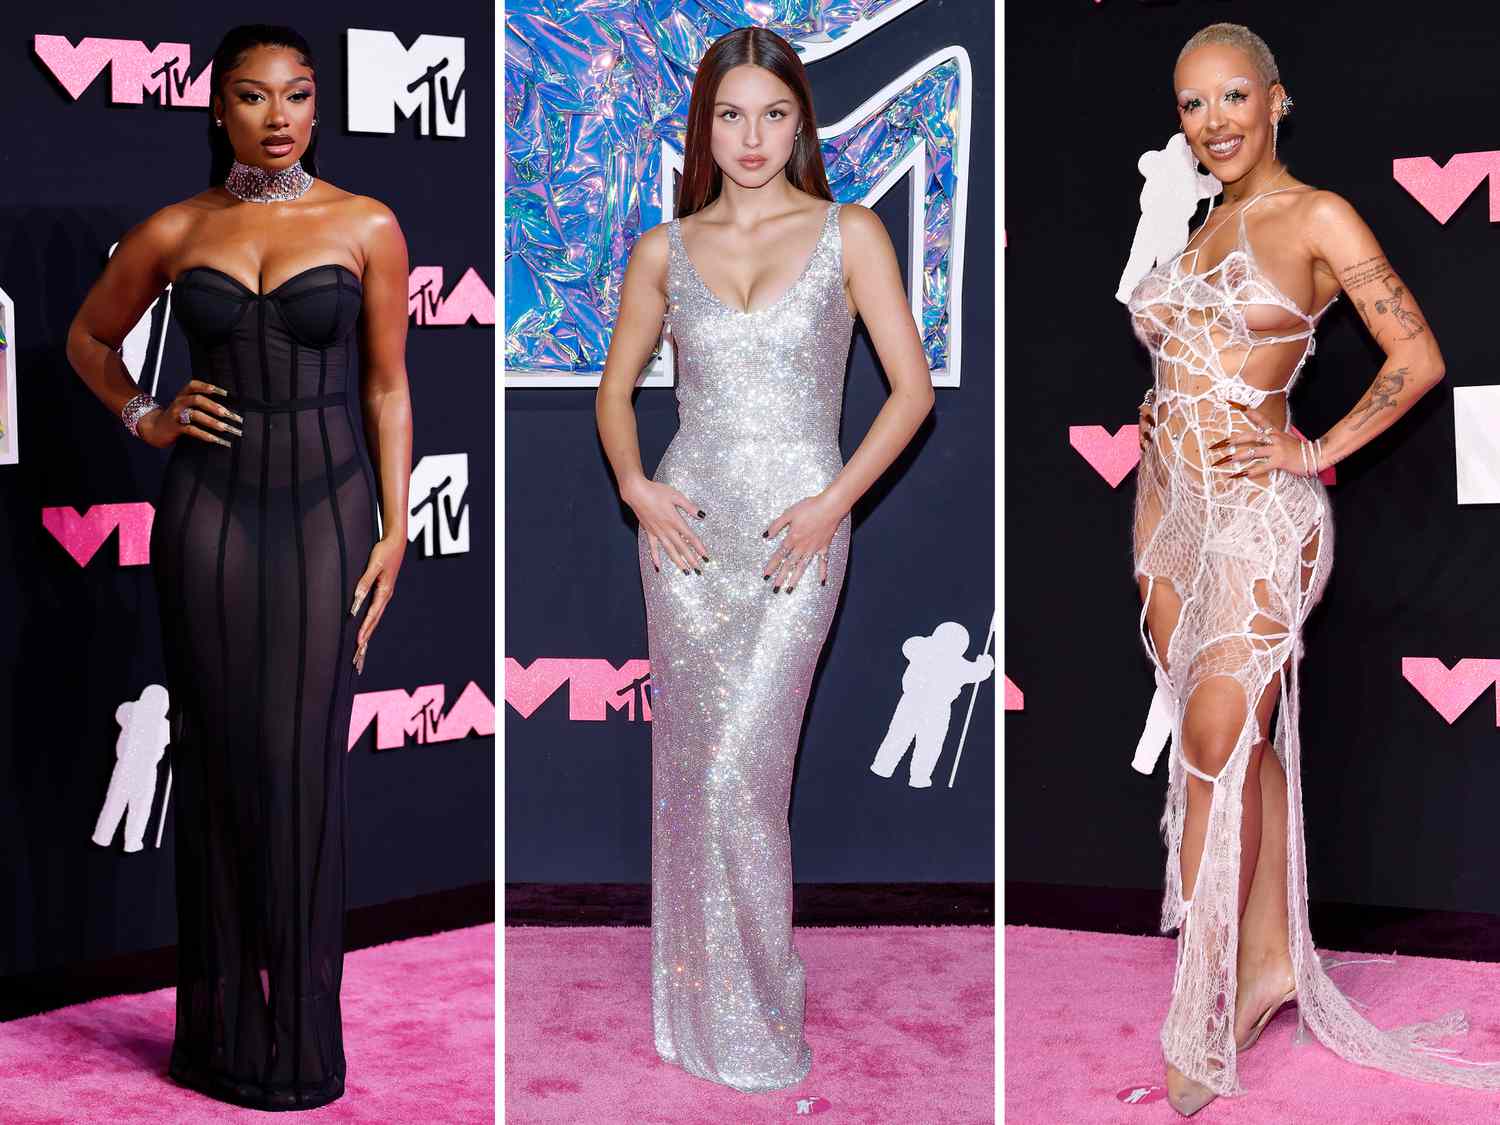 MTV VMAs Showcase The Stars: A Night Of Music And Glamour